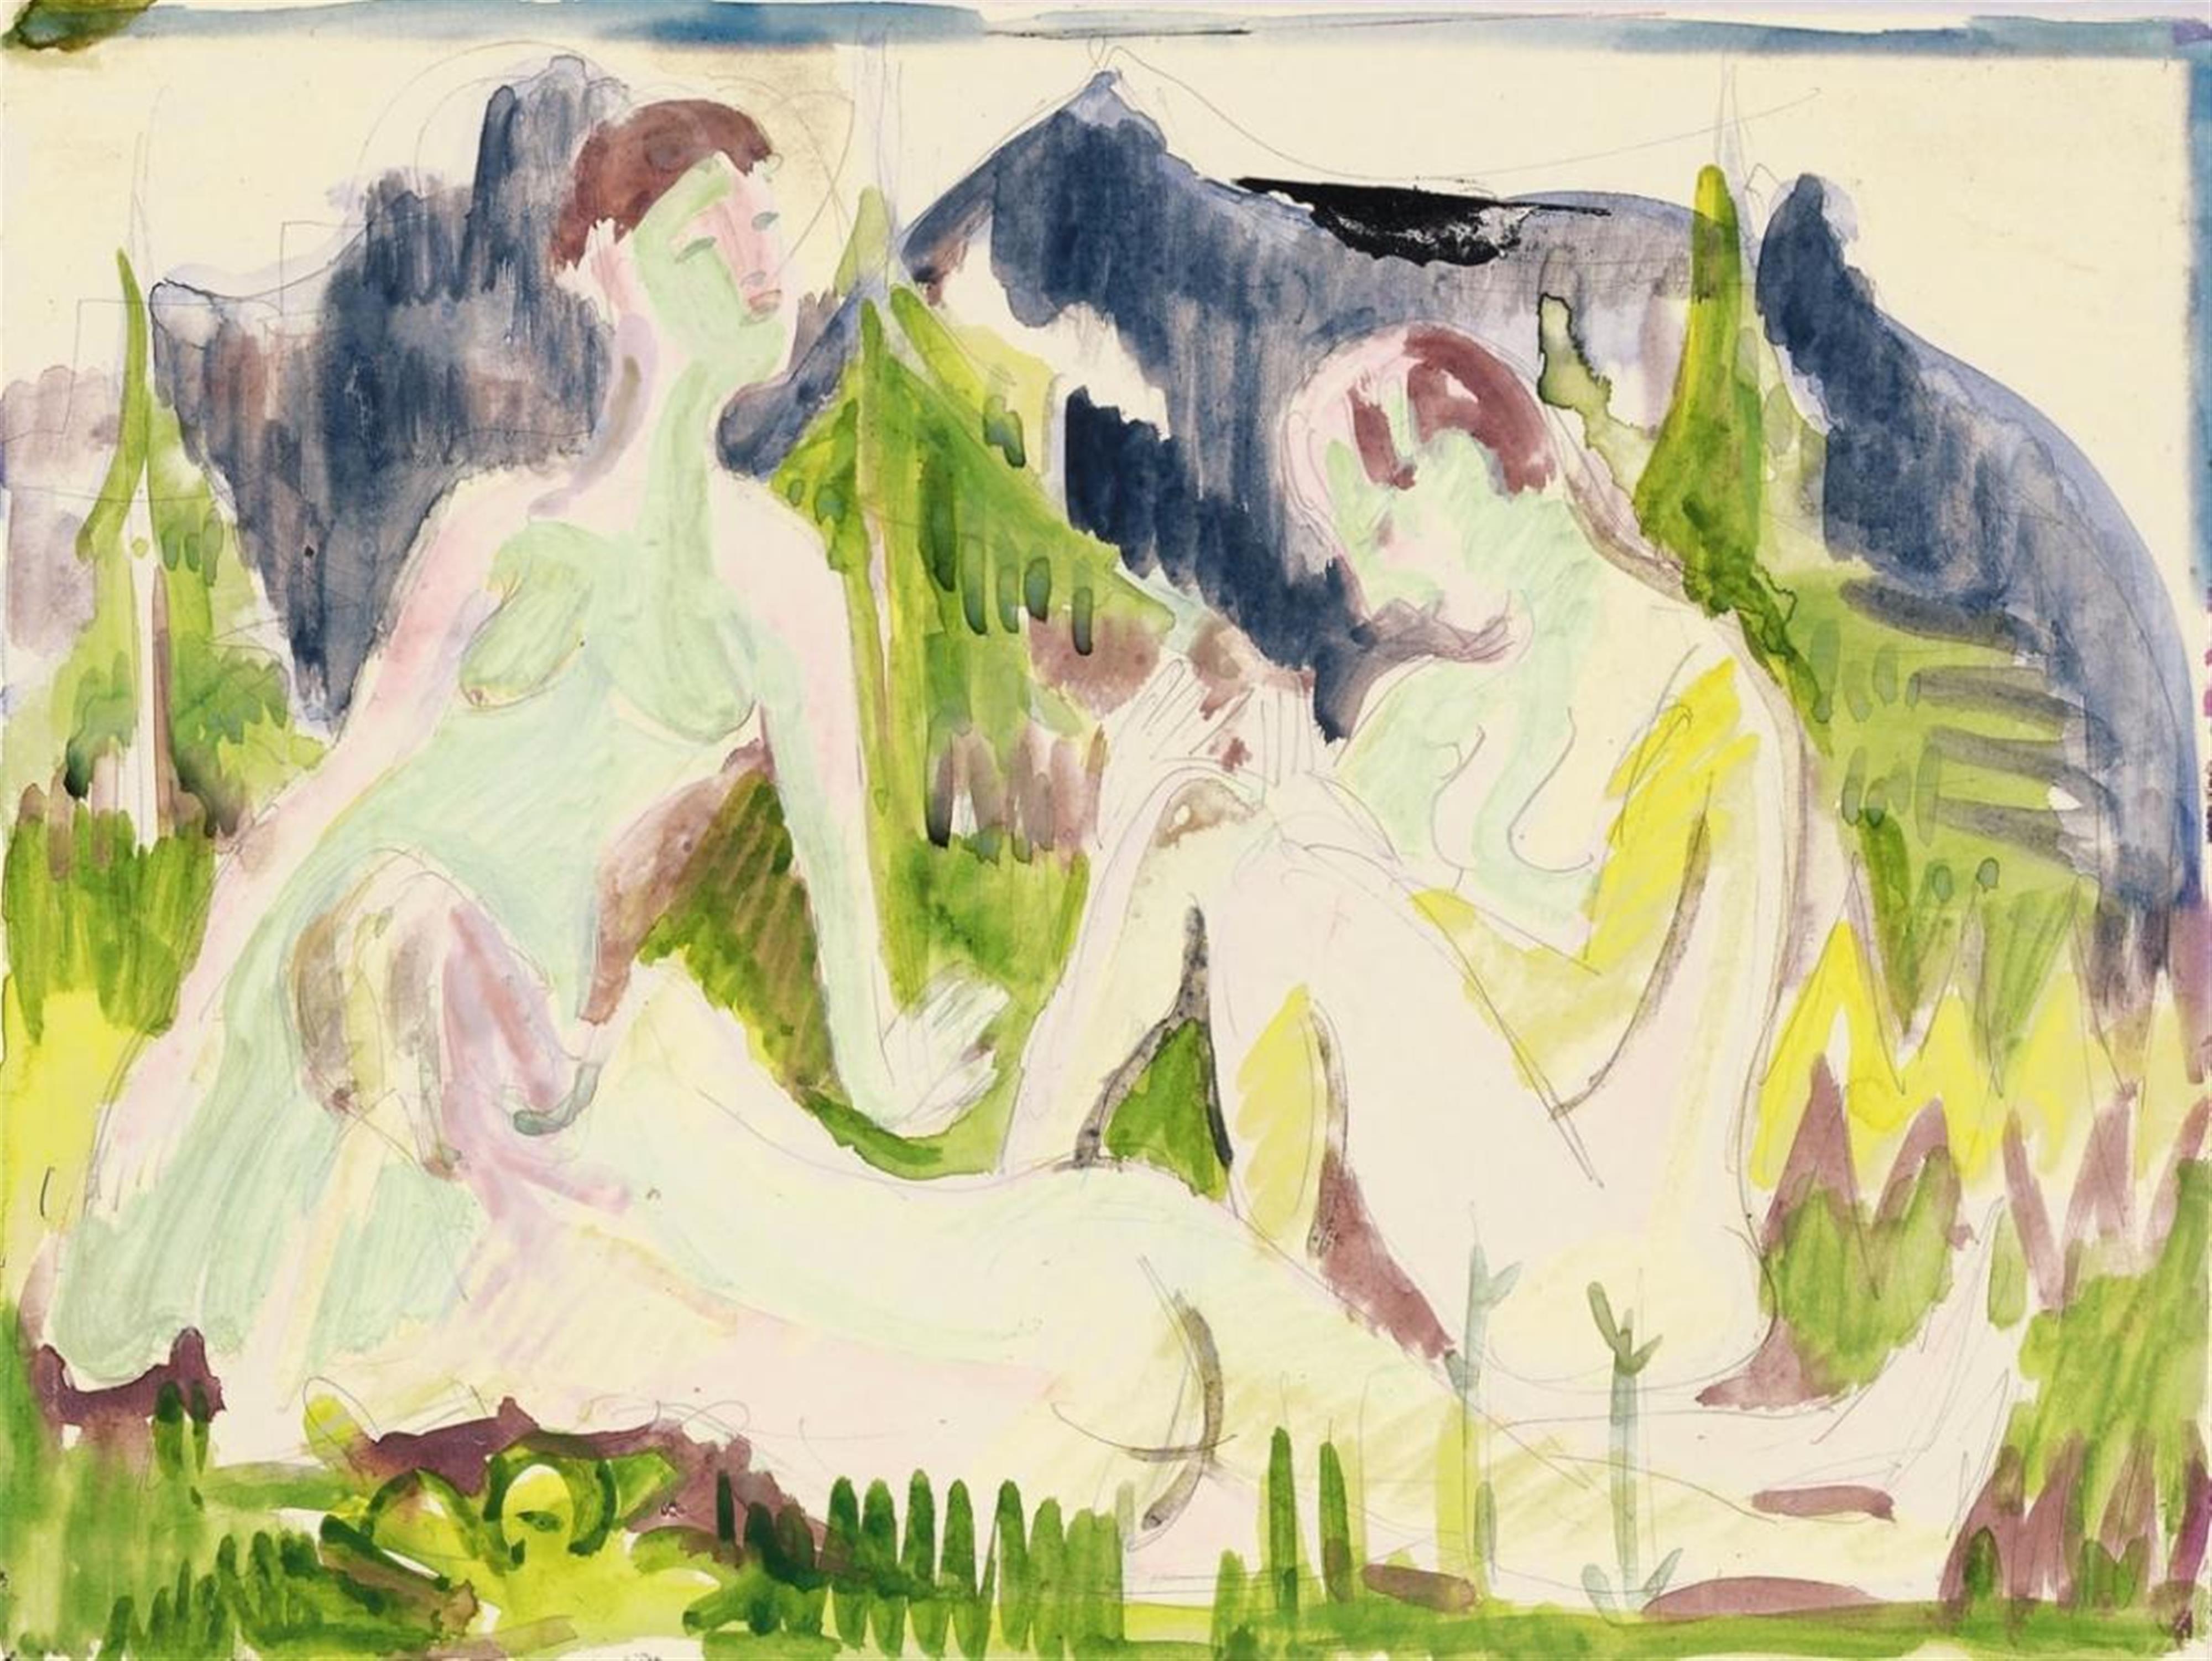 Ernst Ludwig Kirchner - Three Bathers (Nudes in Mountain Landscape) - image-1